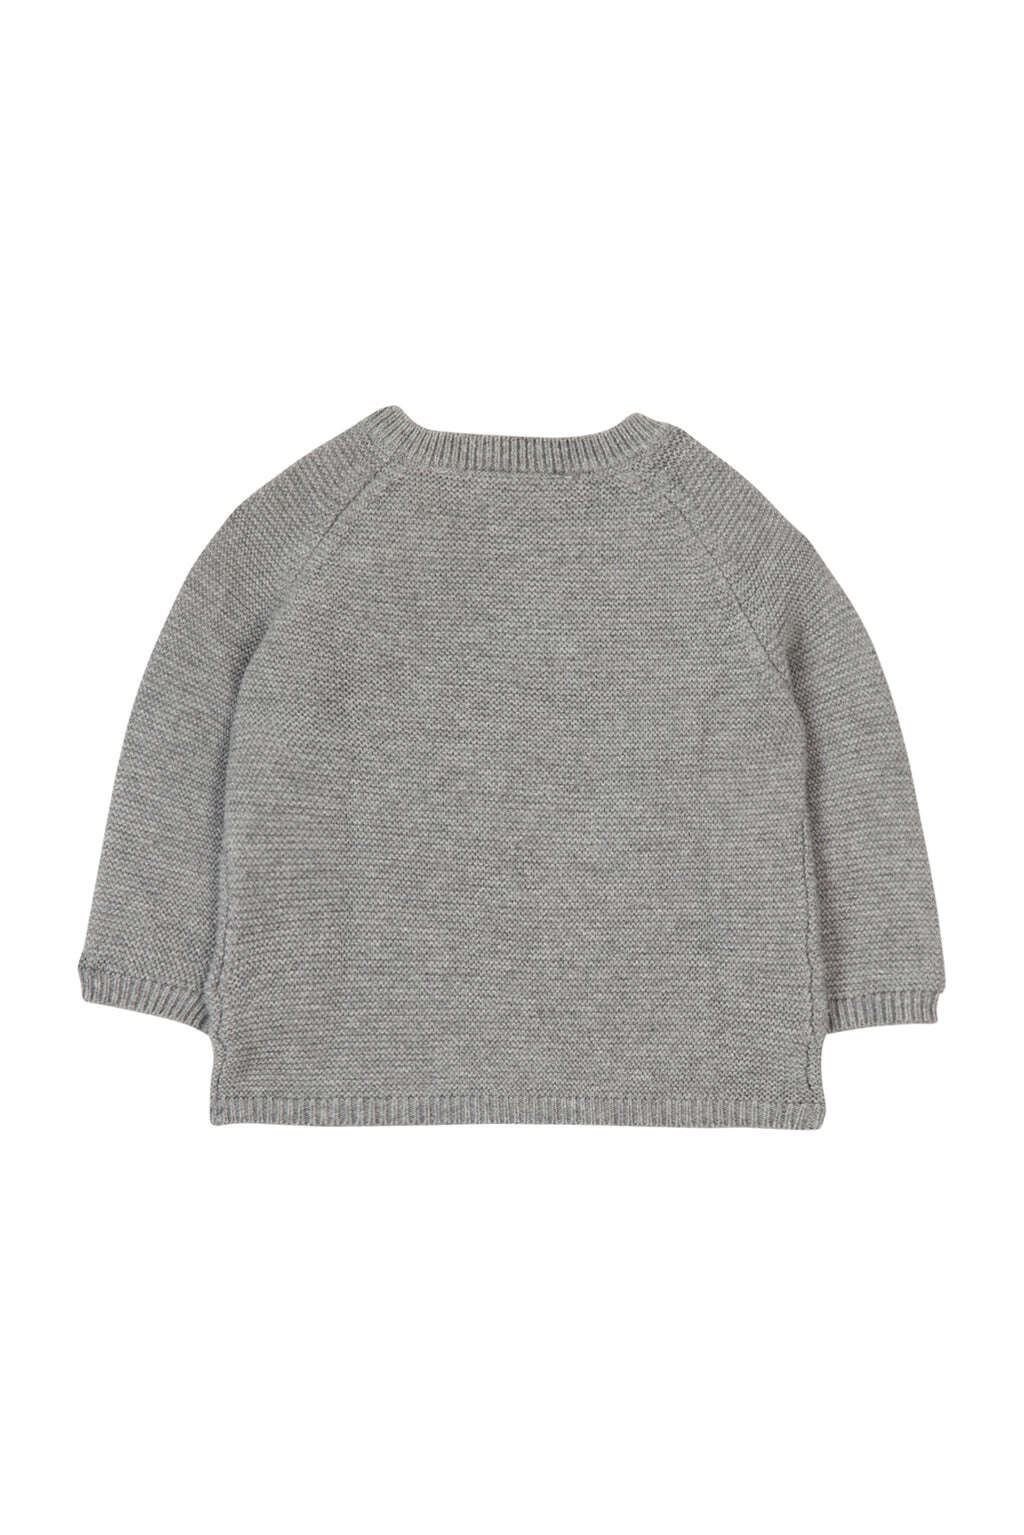 Pull - Gris chiné broderie ours